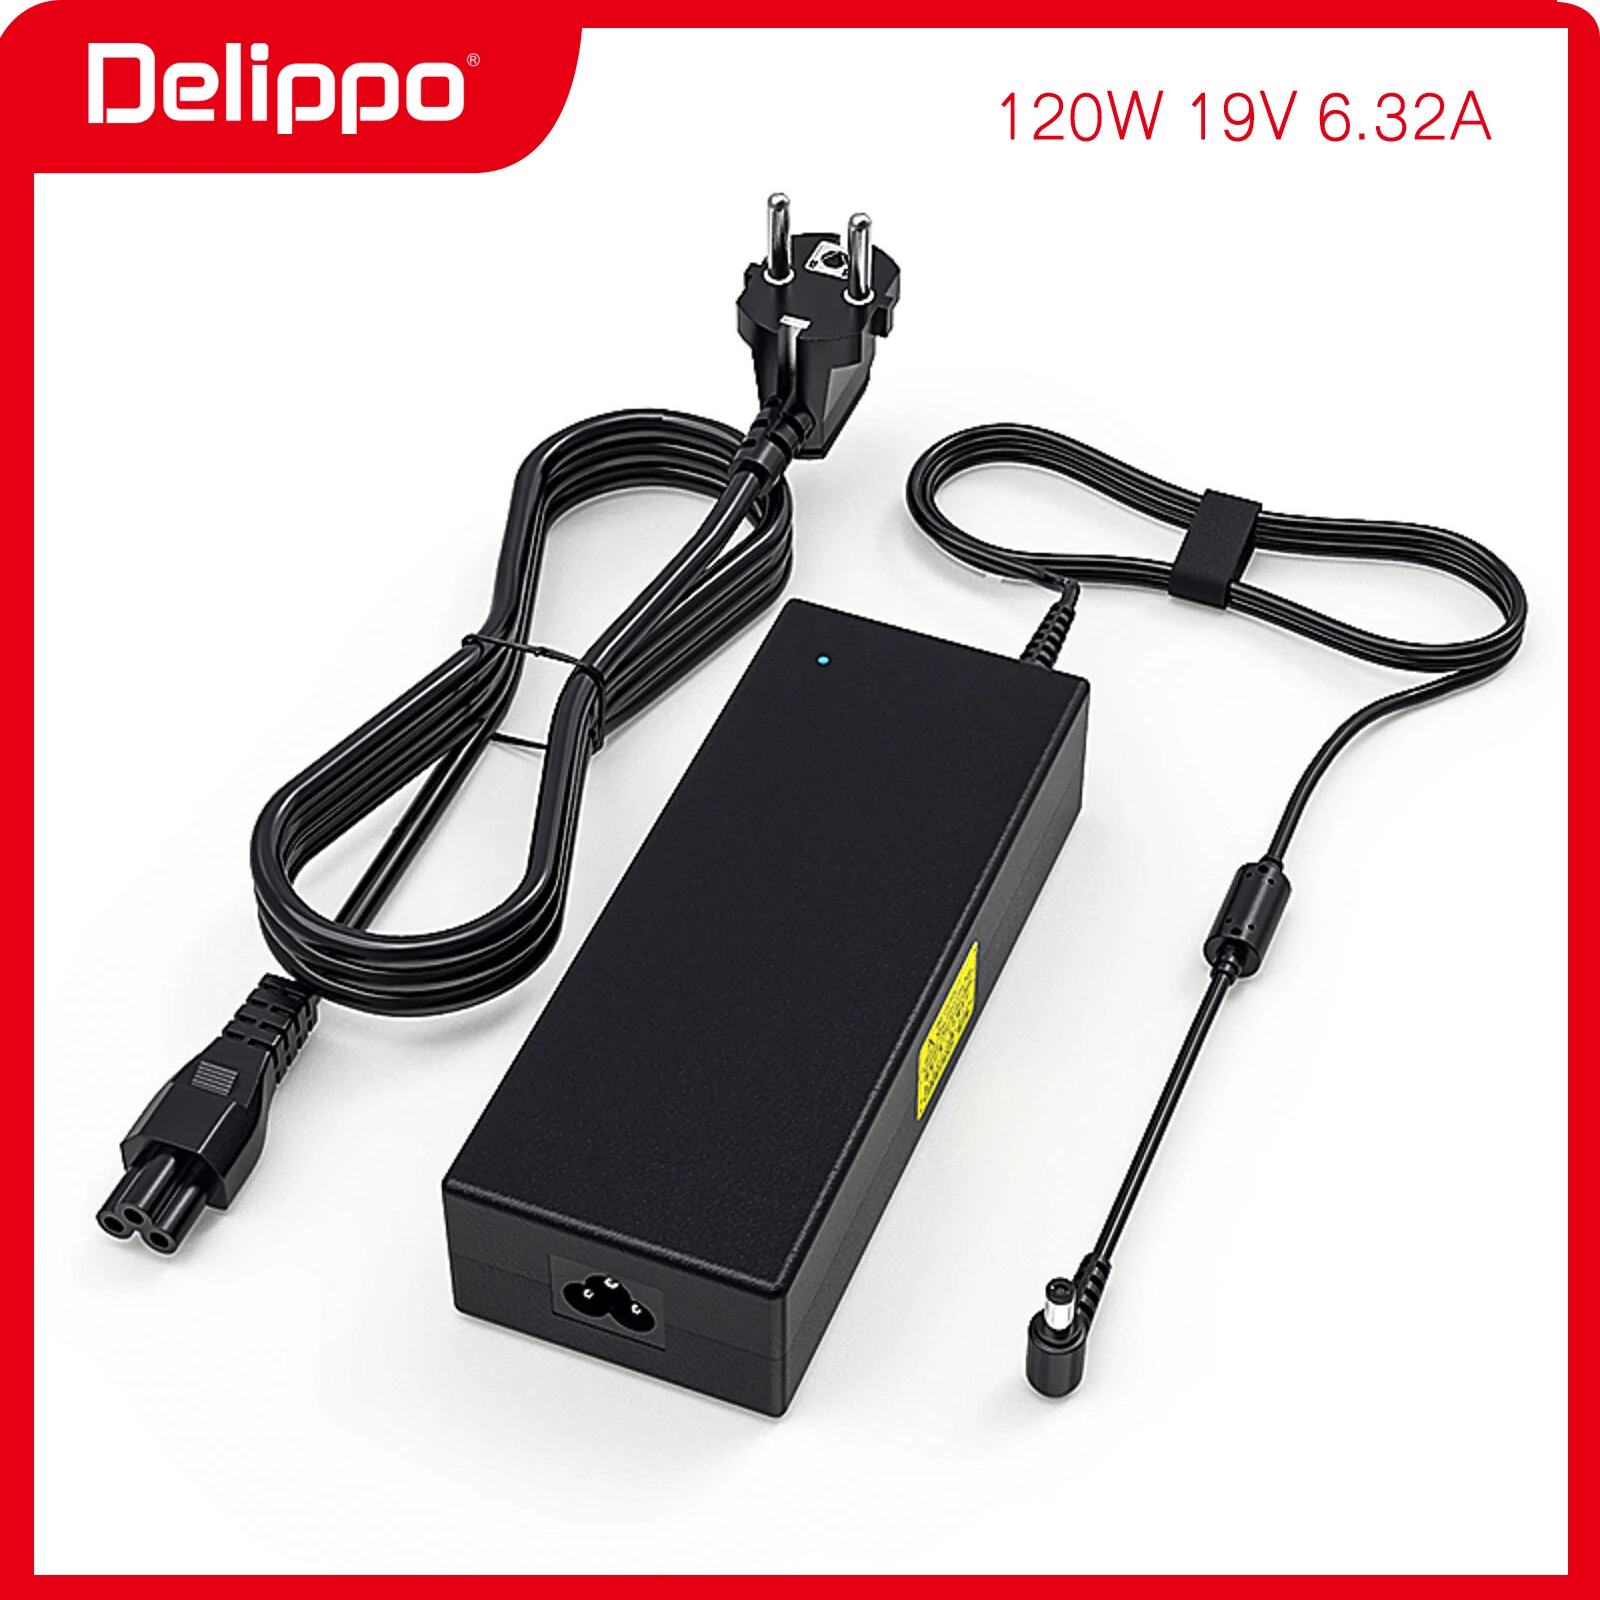 

Delippo 19V 6.32A 120W AC Adapter Charger For Asus N550 N750 G53JW C90S N53S N46 Rog Gl551 Gl551JM Gl771JM notebook Power Supply